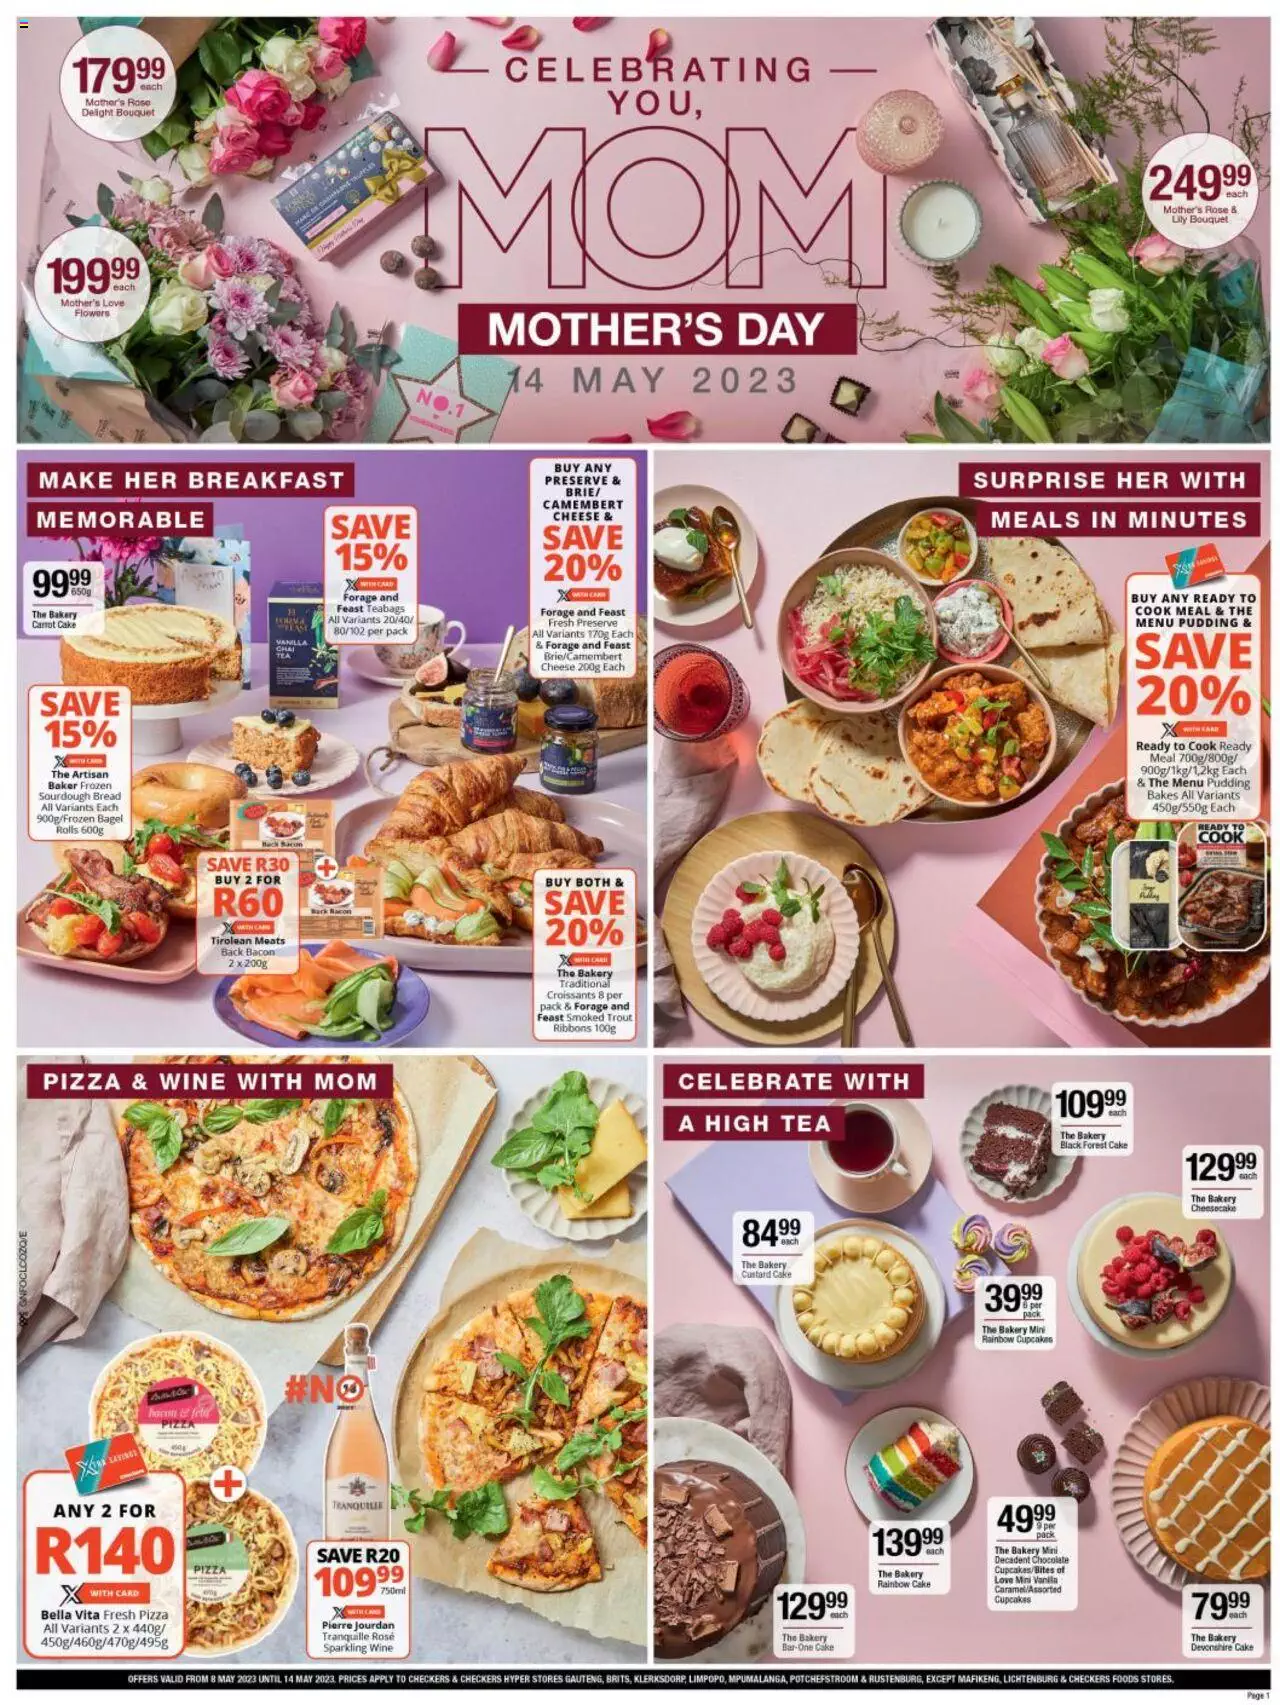 Checkers Specials Mother’s Day 8 – 14 May 2023